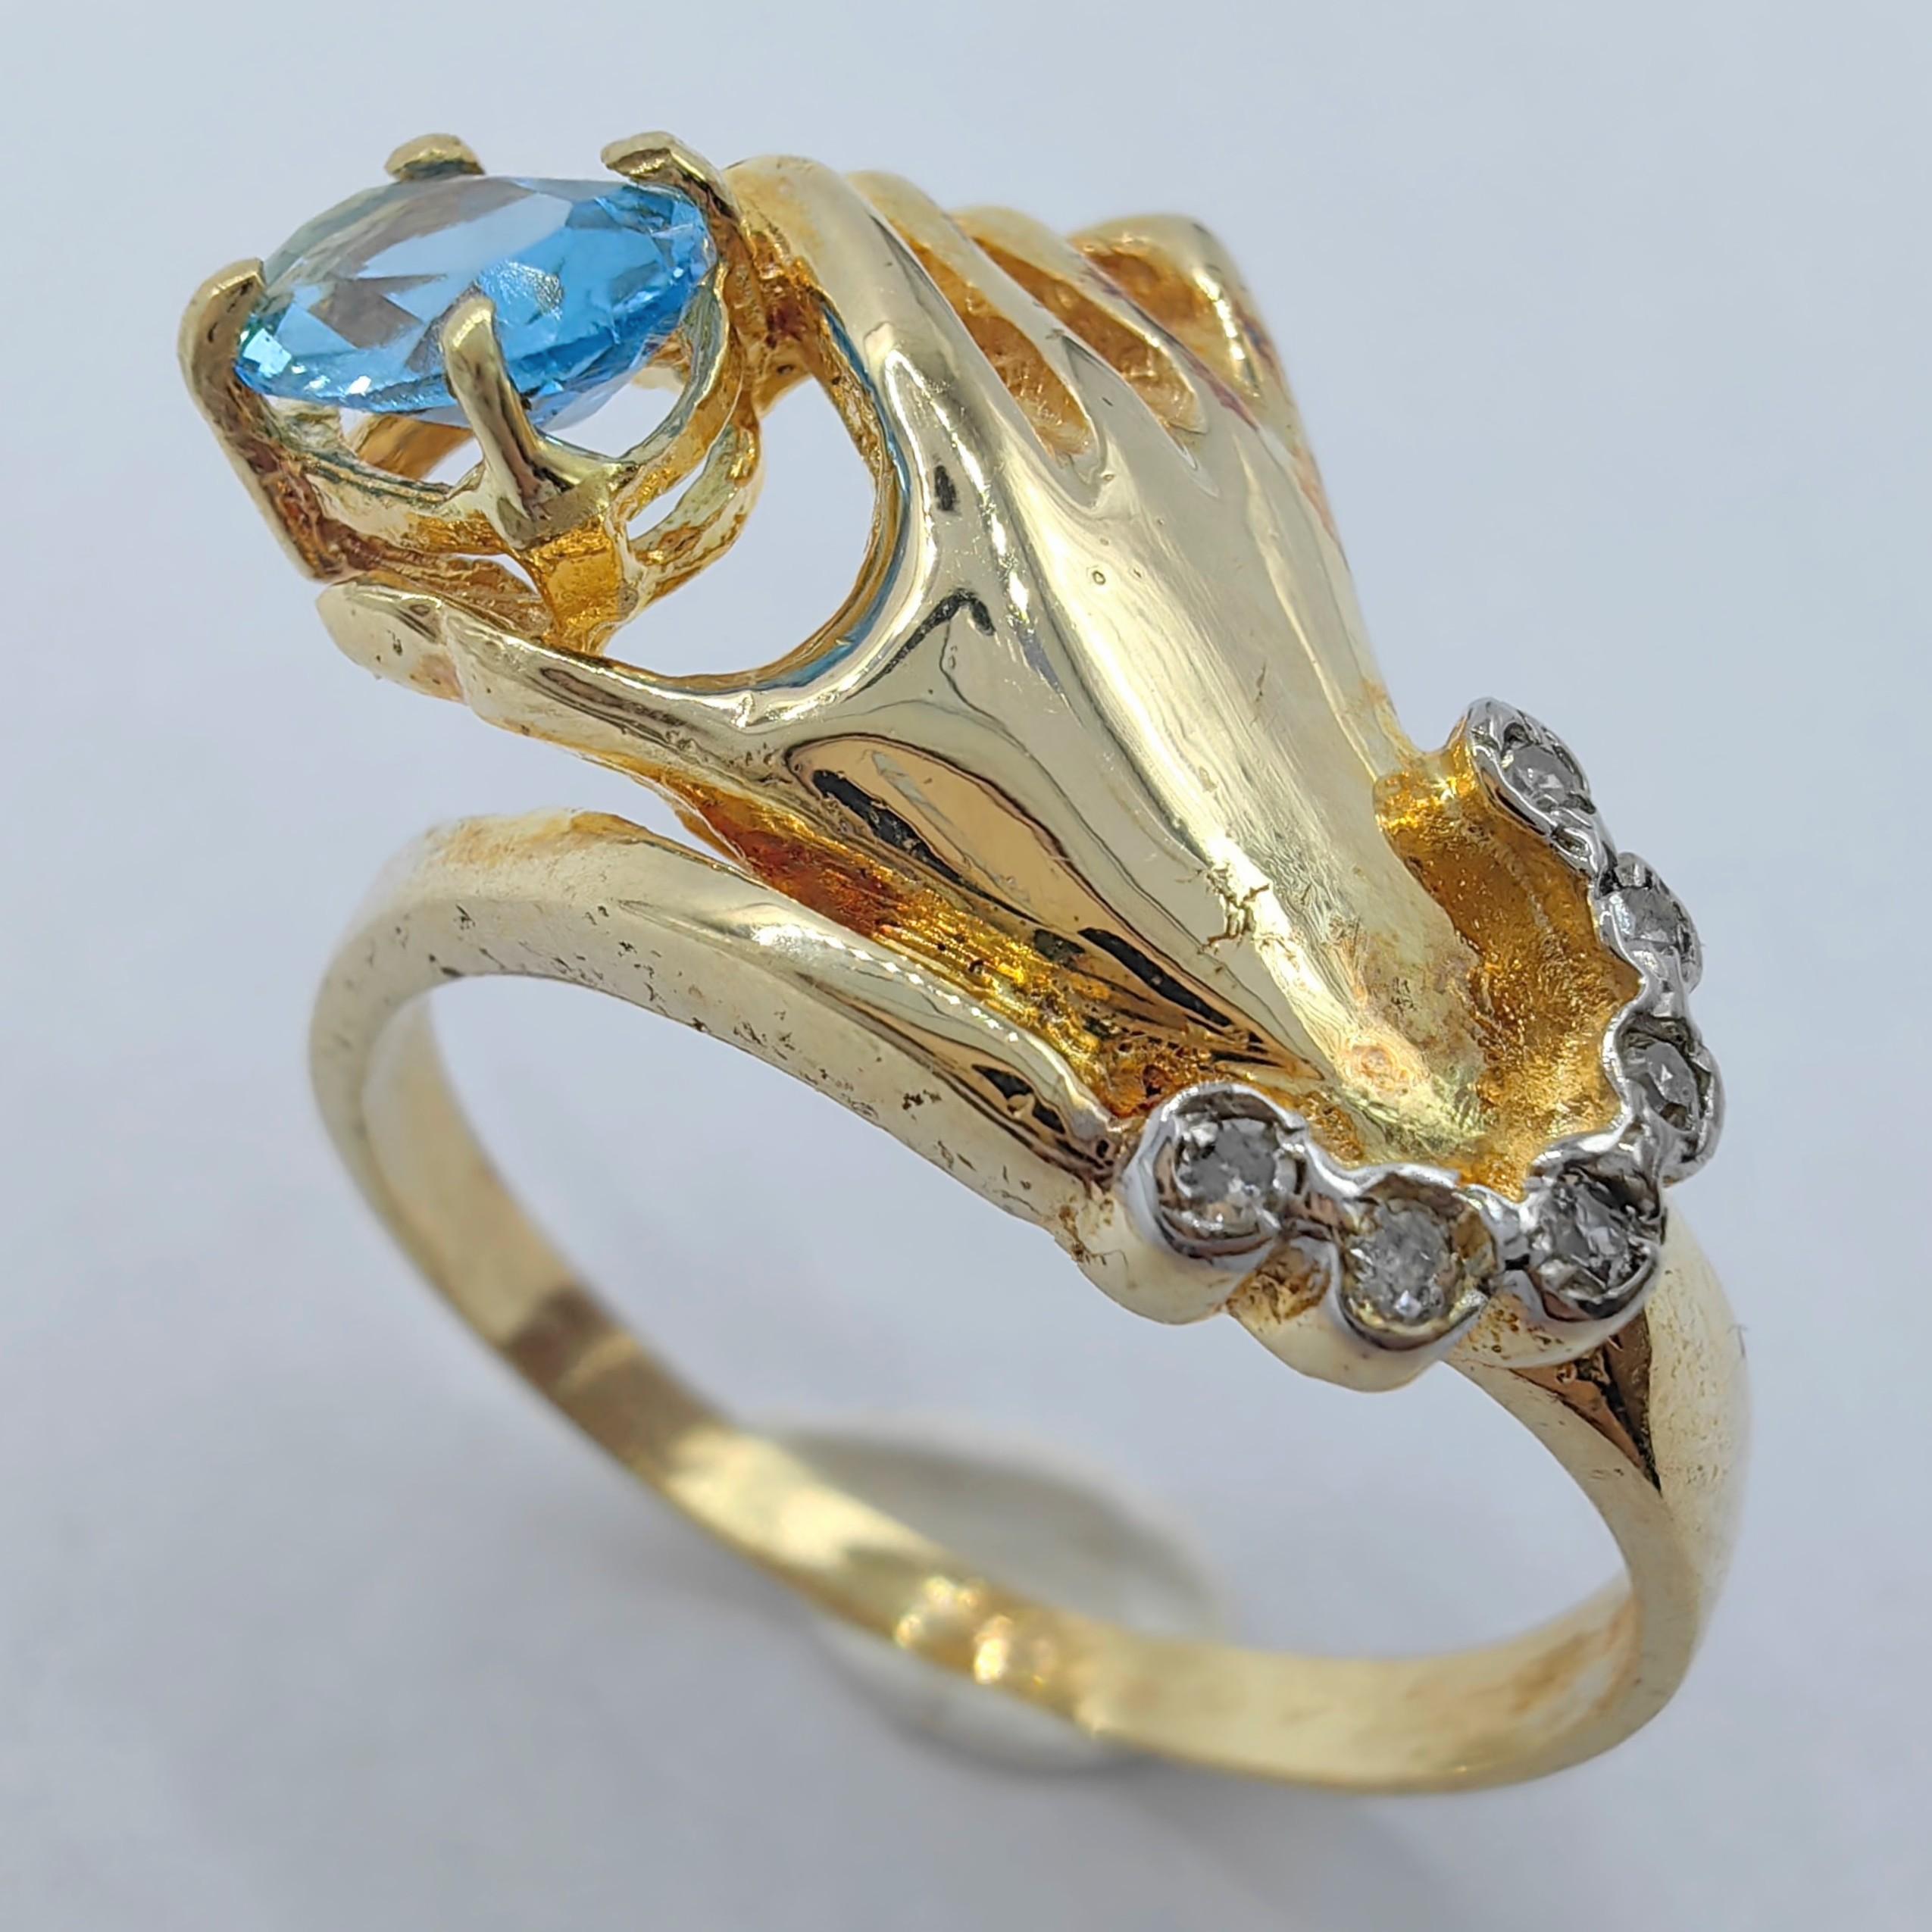 Introducing our exquisite Oval-cut Blue Topaz in a Hand Diamond Ring in 14K Yellow Gold, a symbol of elegance and grace. This unique ring features a beautifully crafted hand motif in 14K yellow gold, delicately holding an blue topaz gemstone.

The